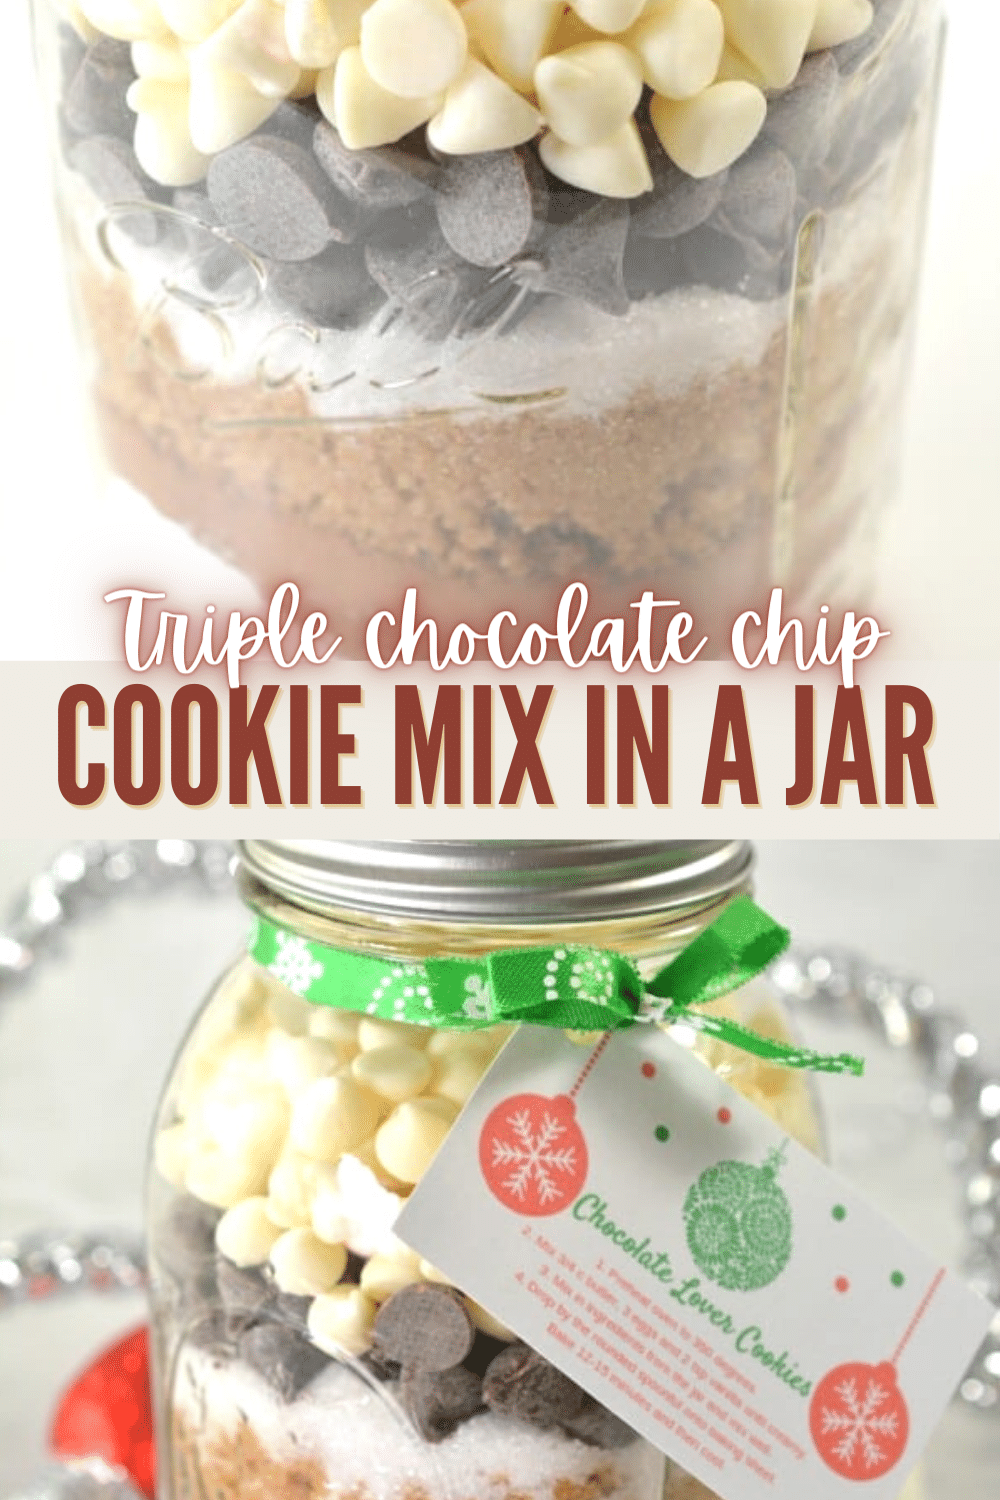 Triple chocolate chip cookie mix in a jar.